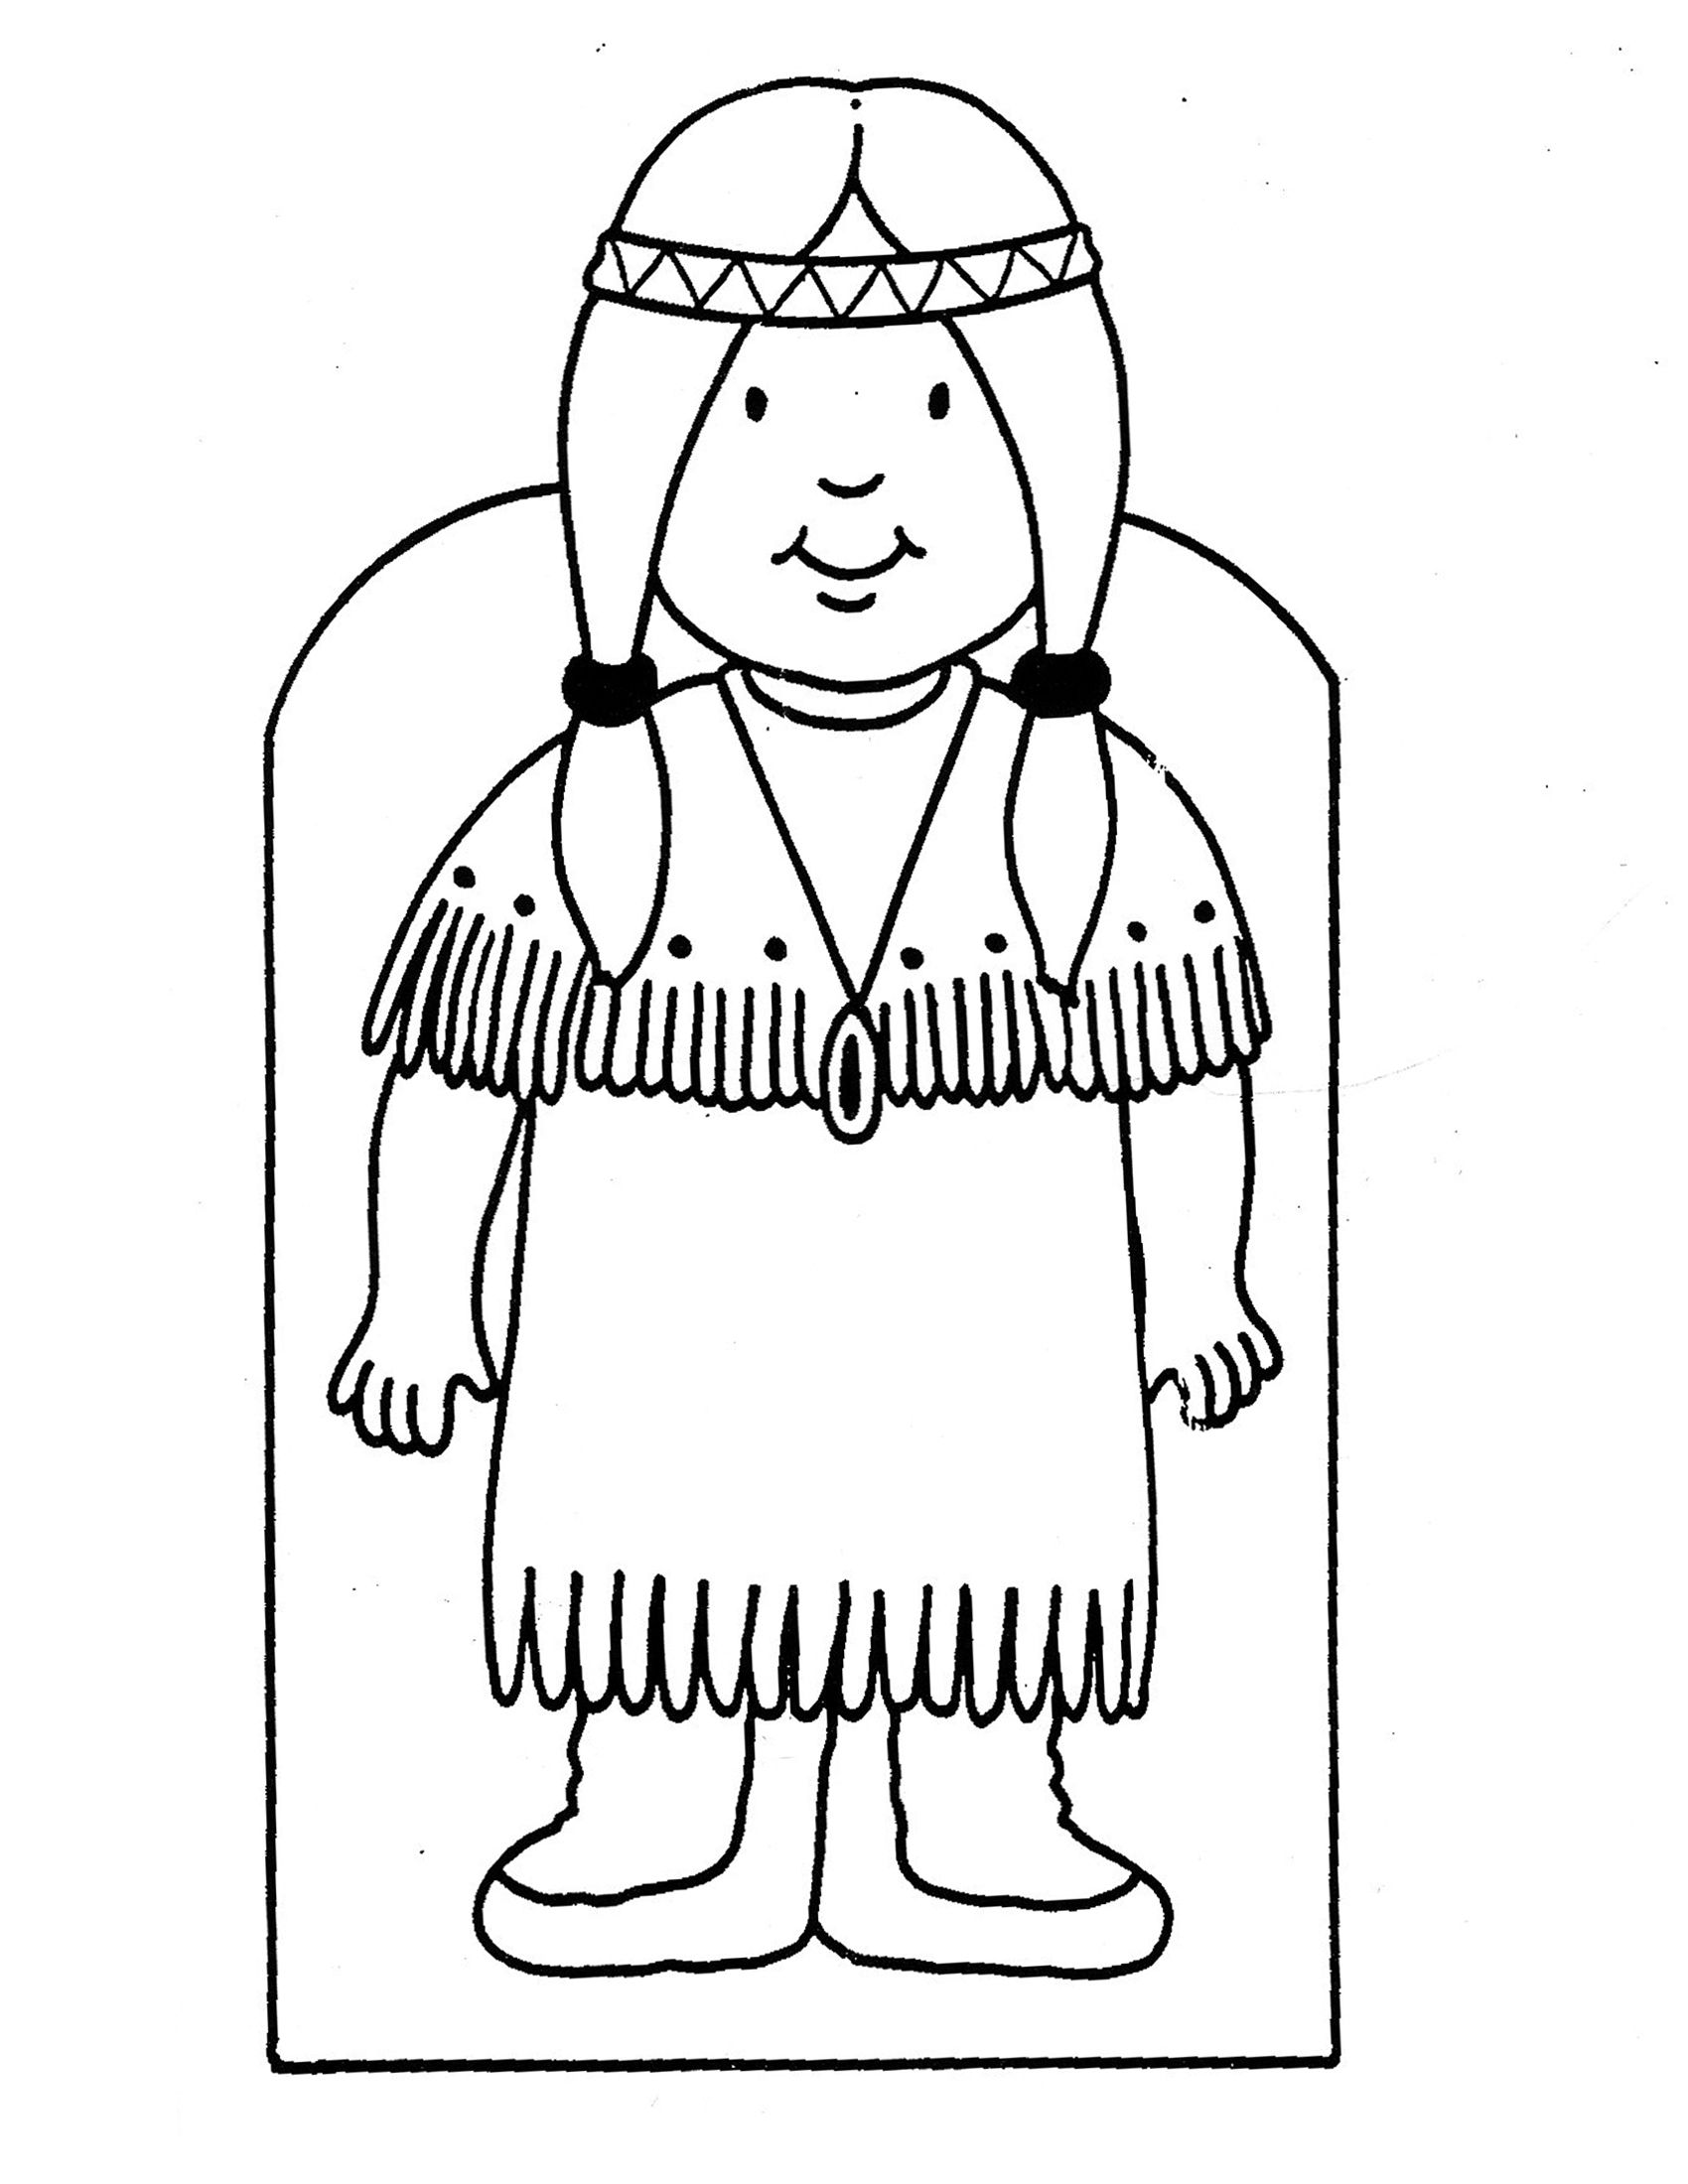 Native american coloring pages